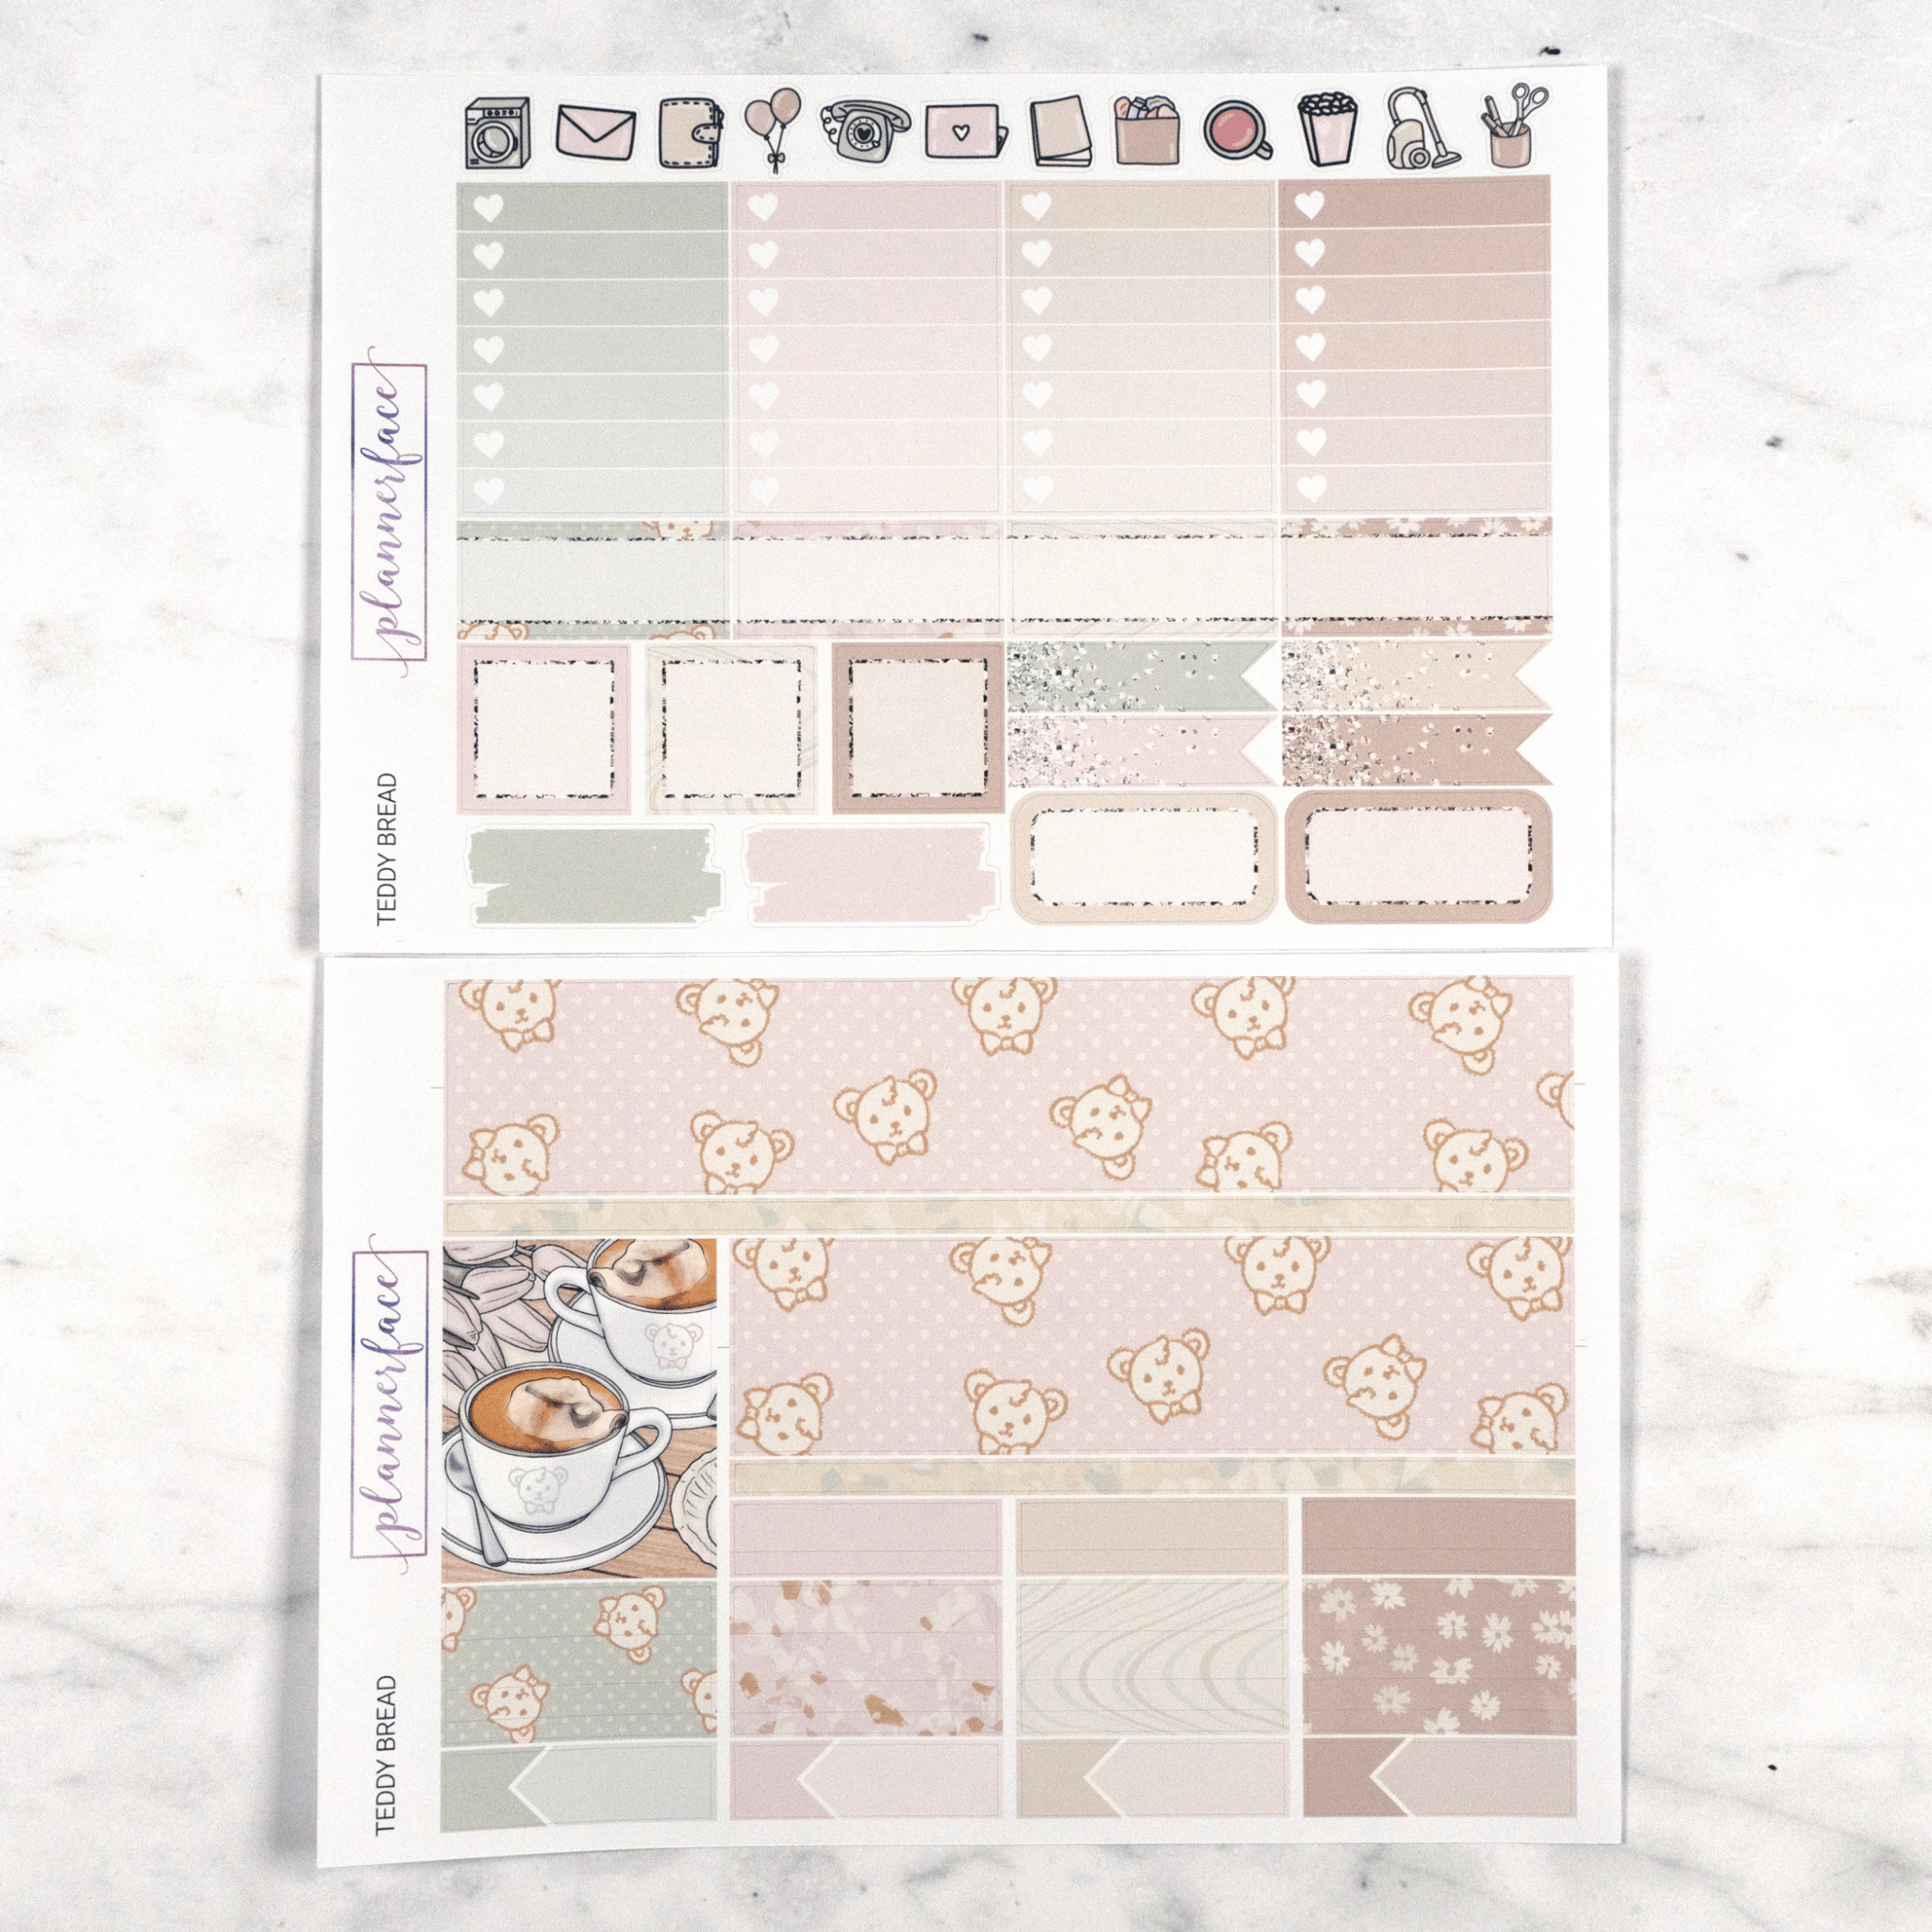 Teddy Bread Weekly Kit by Plannerface